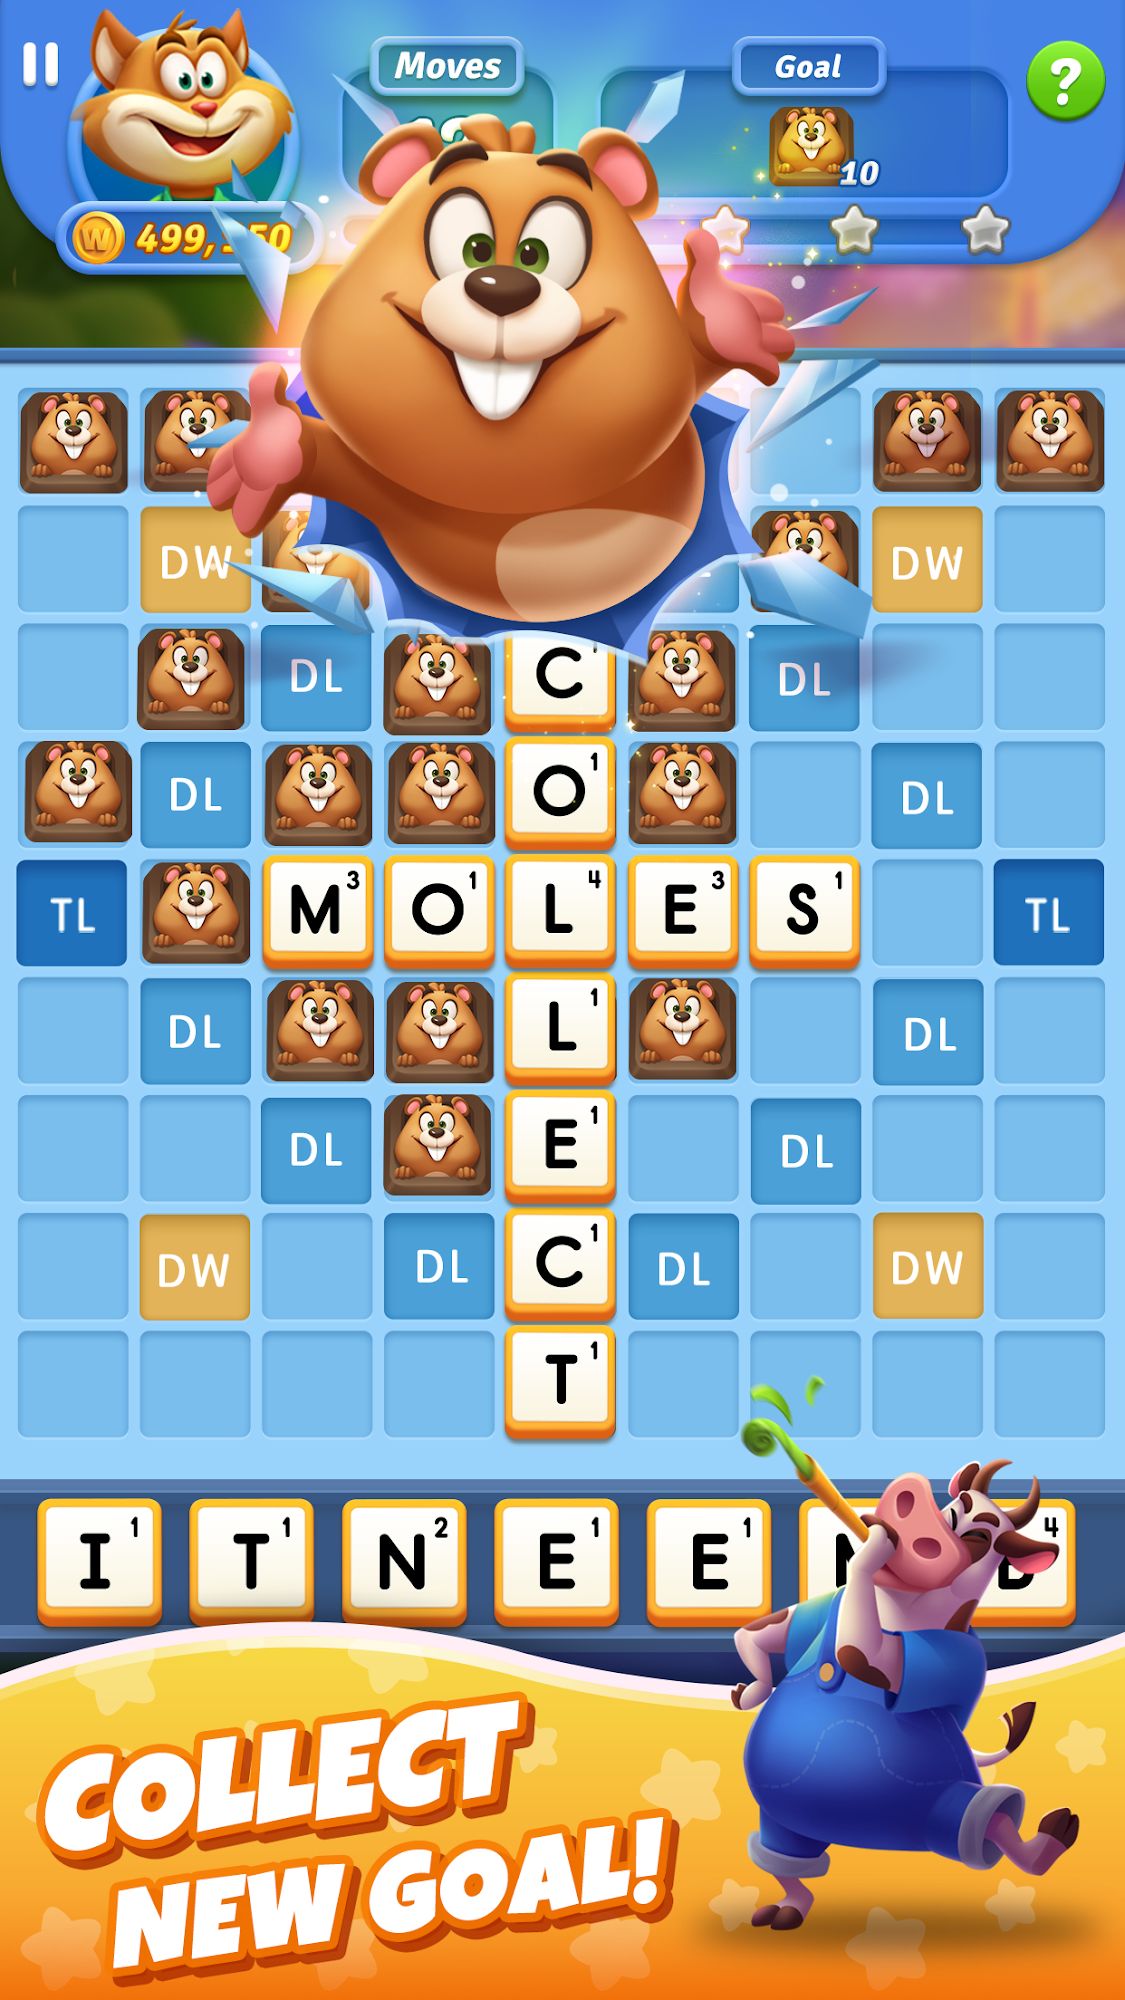 Word Buddies - Fun Scrabble Game for Android